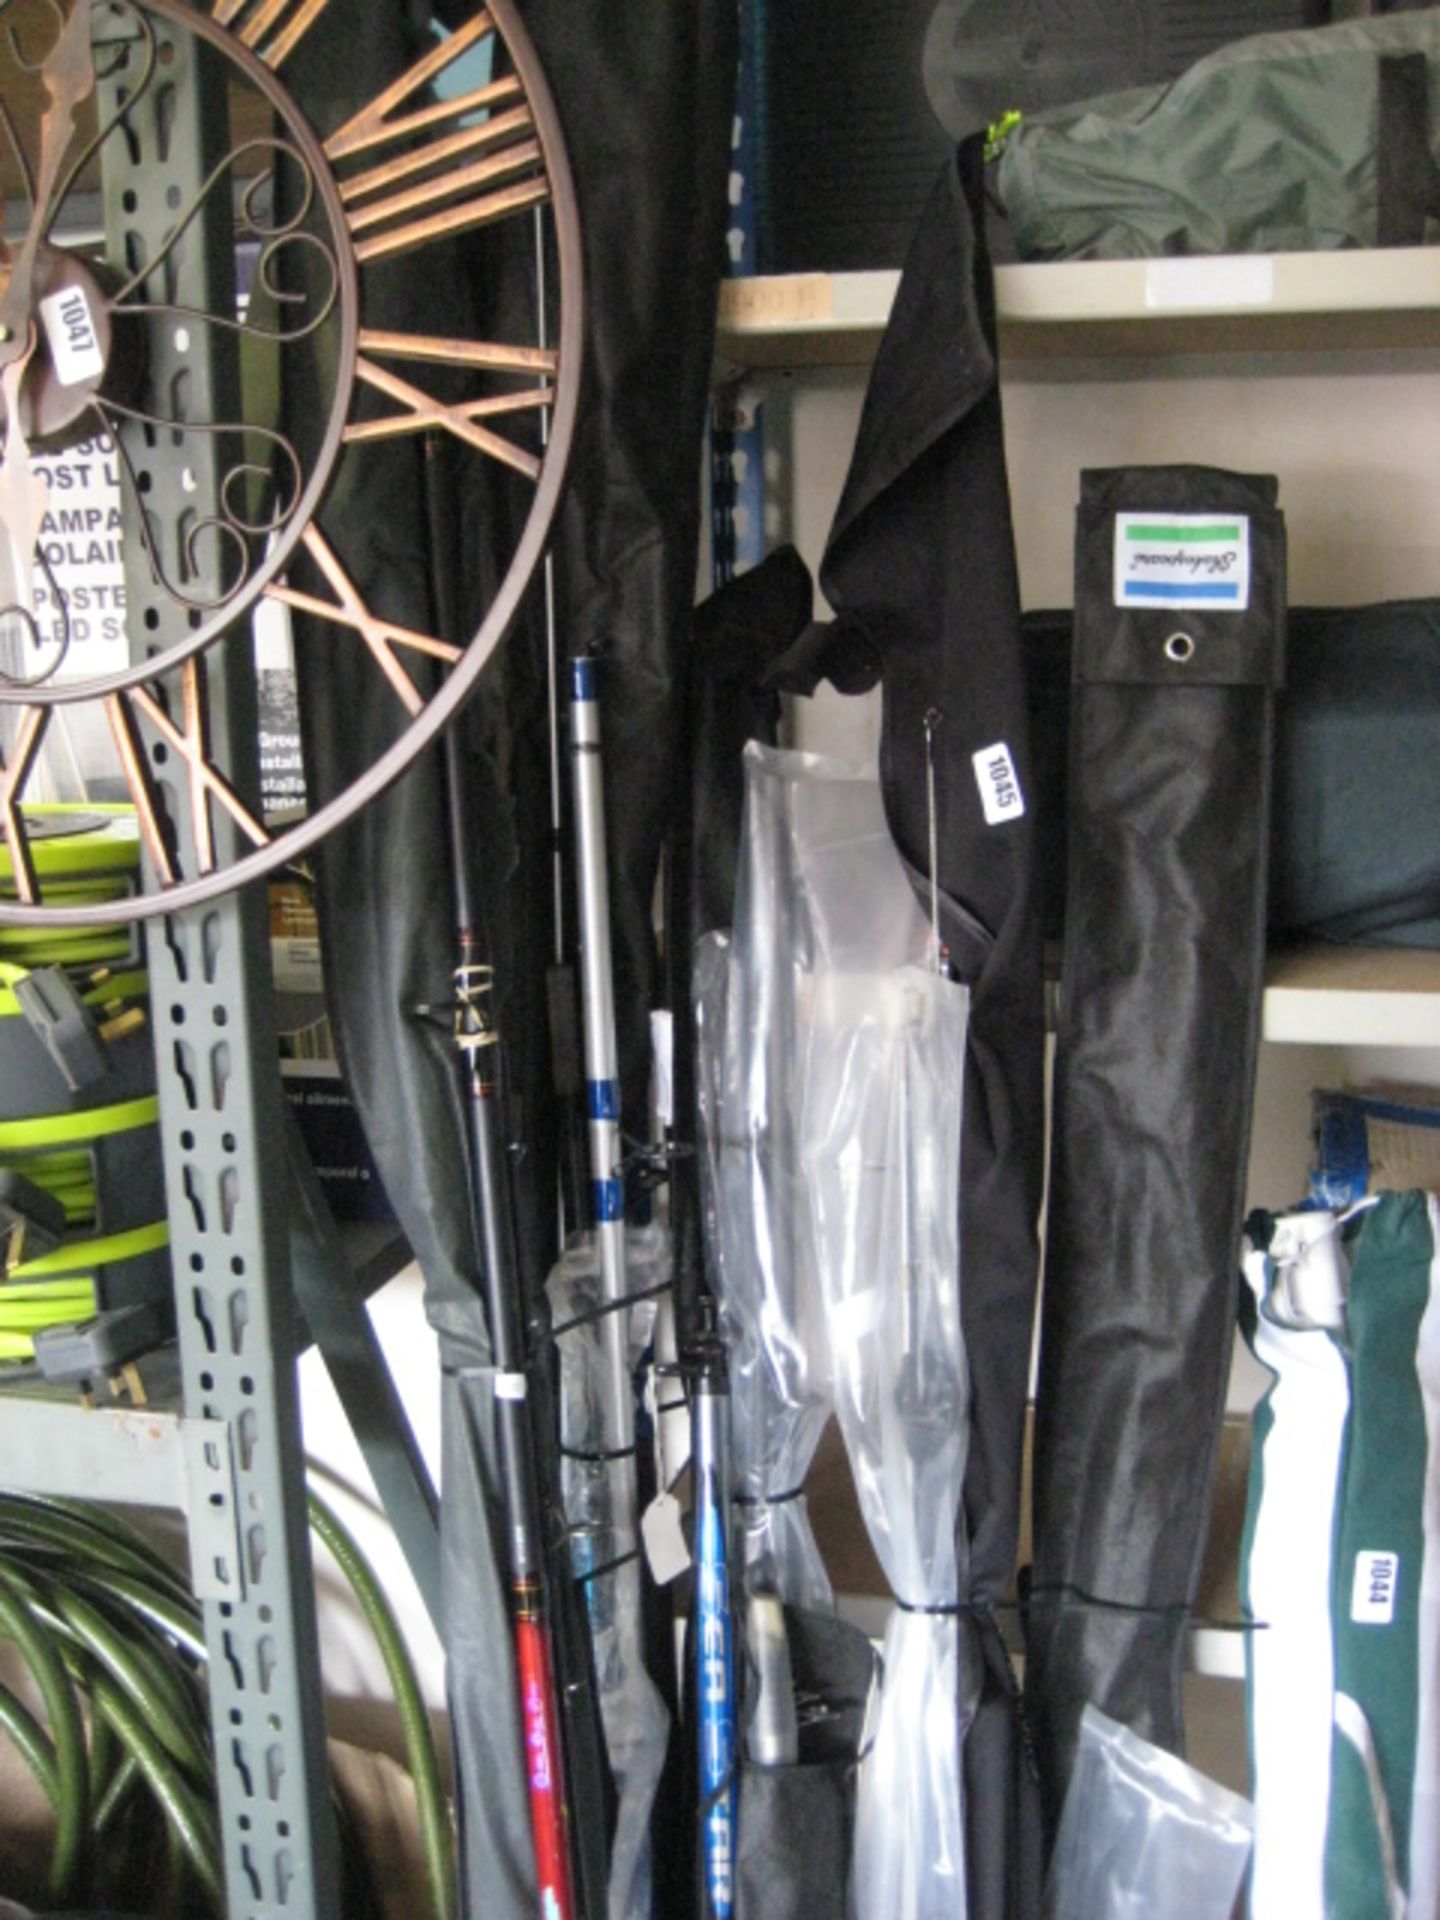 6 bundles of various mixed brand fishing rods incl. Shakespeare, Sea Star, Mitchell, Greys, Abu